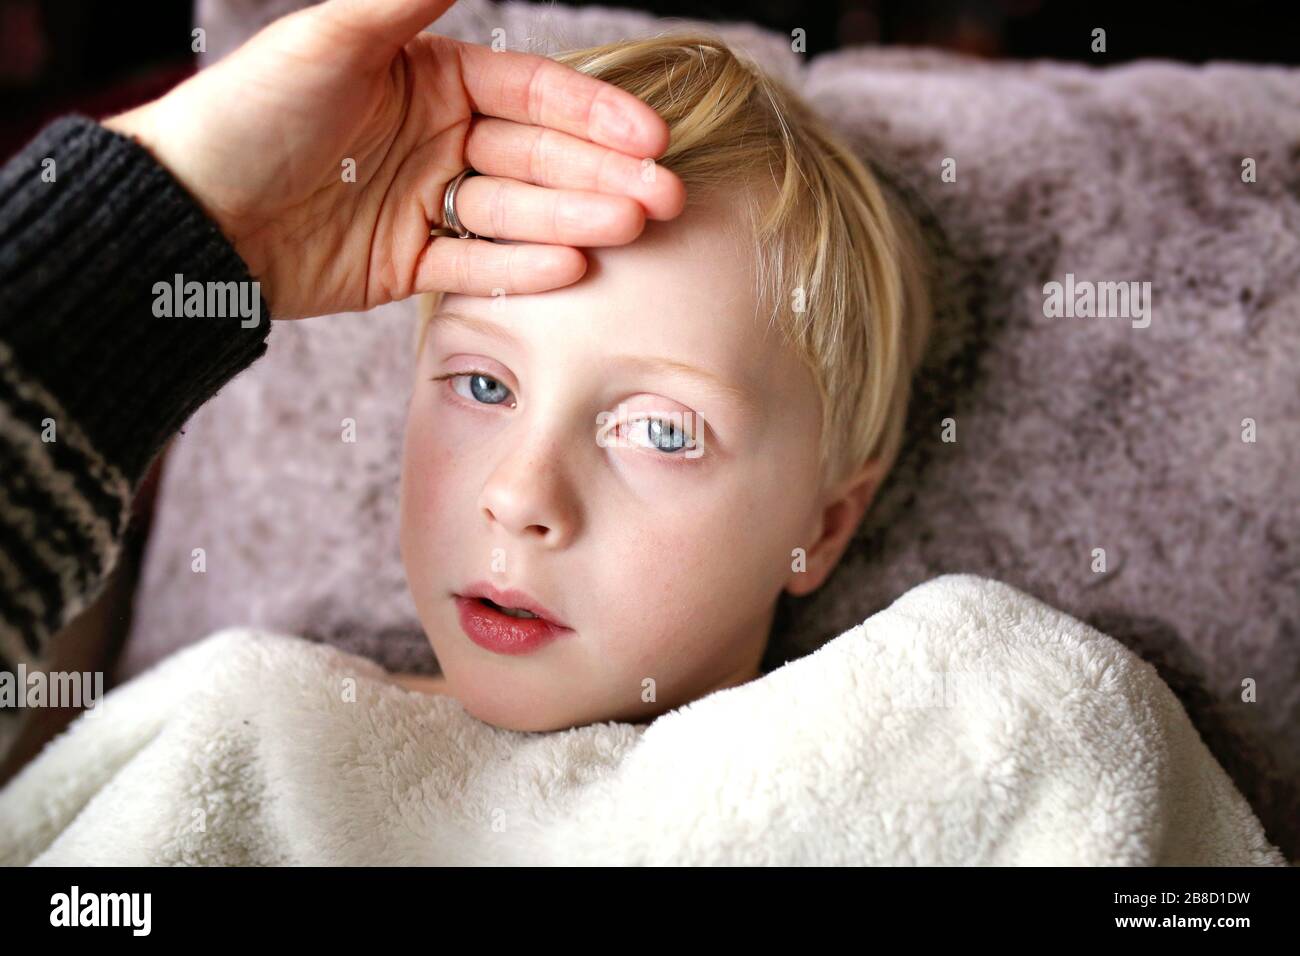 A mother's hand is feeling the temperatur of a young child with a fever who is sick with influenza. Stock Photo